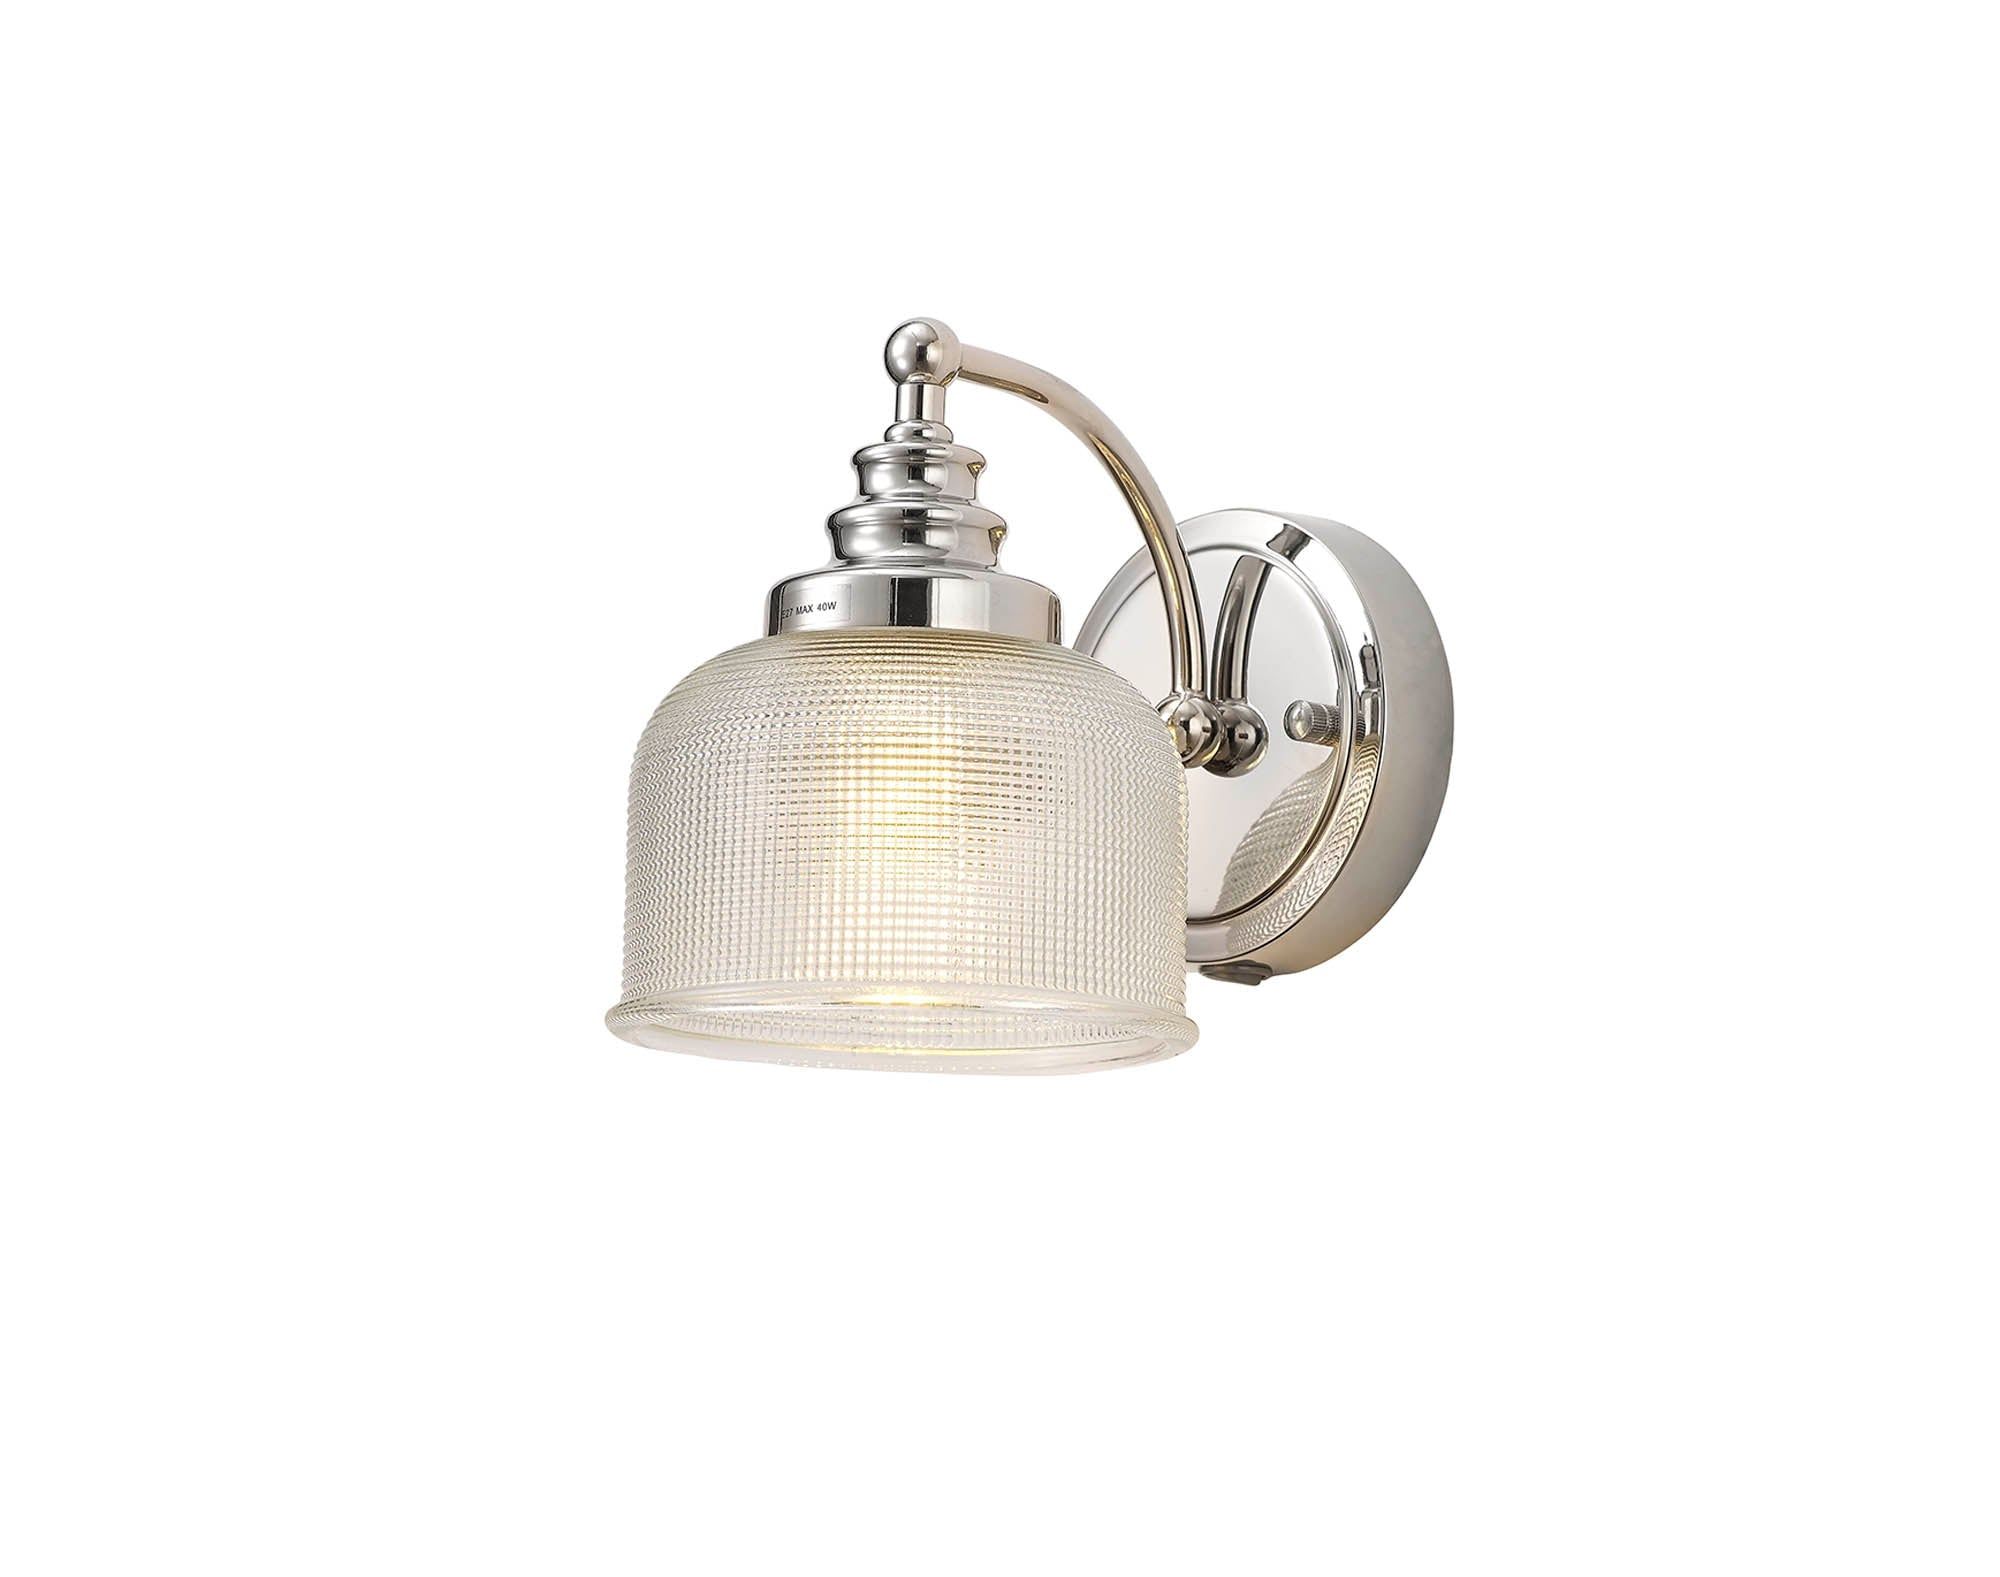 Isola Switched Wall Lamp 1 Light E27 Polished Nickel / Prismatic Glass